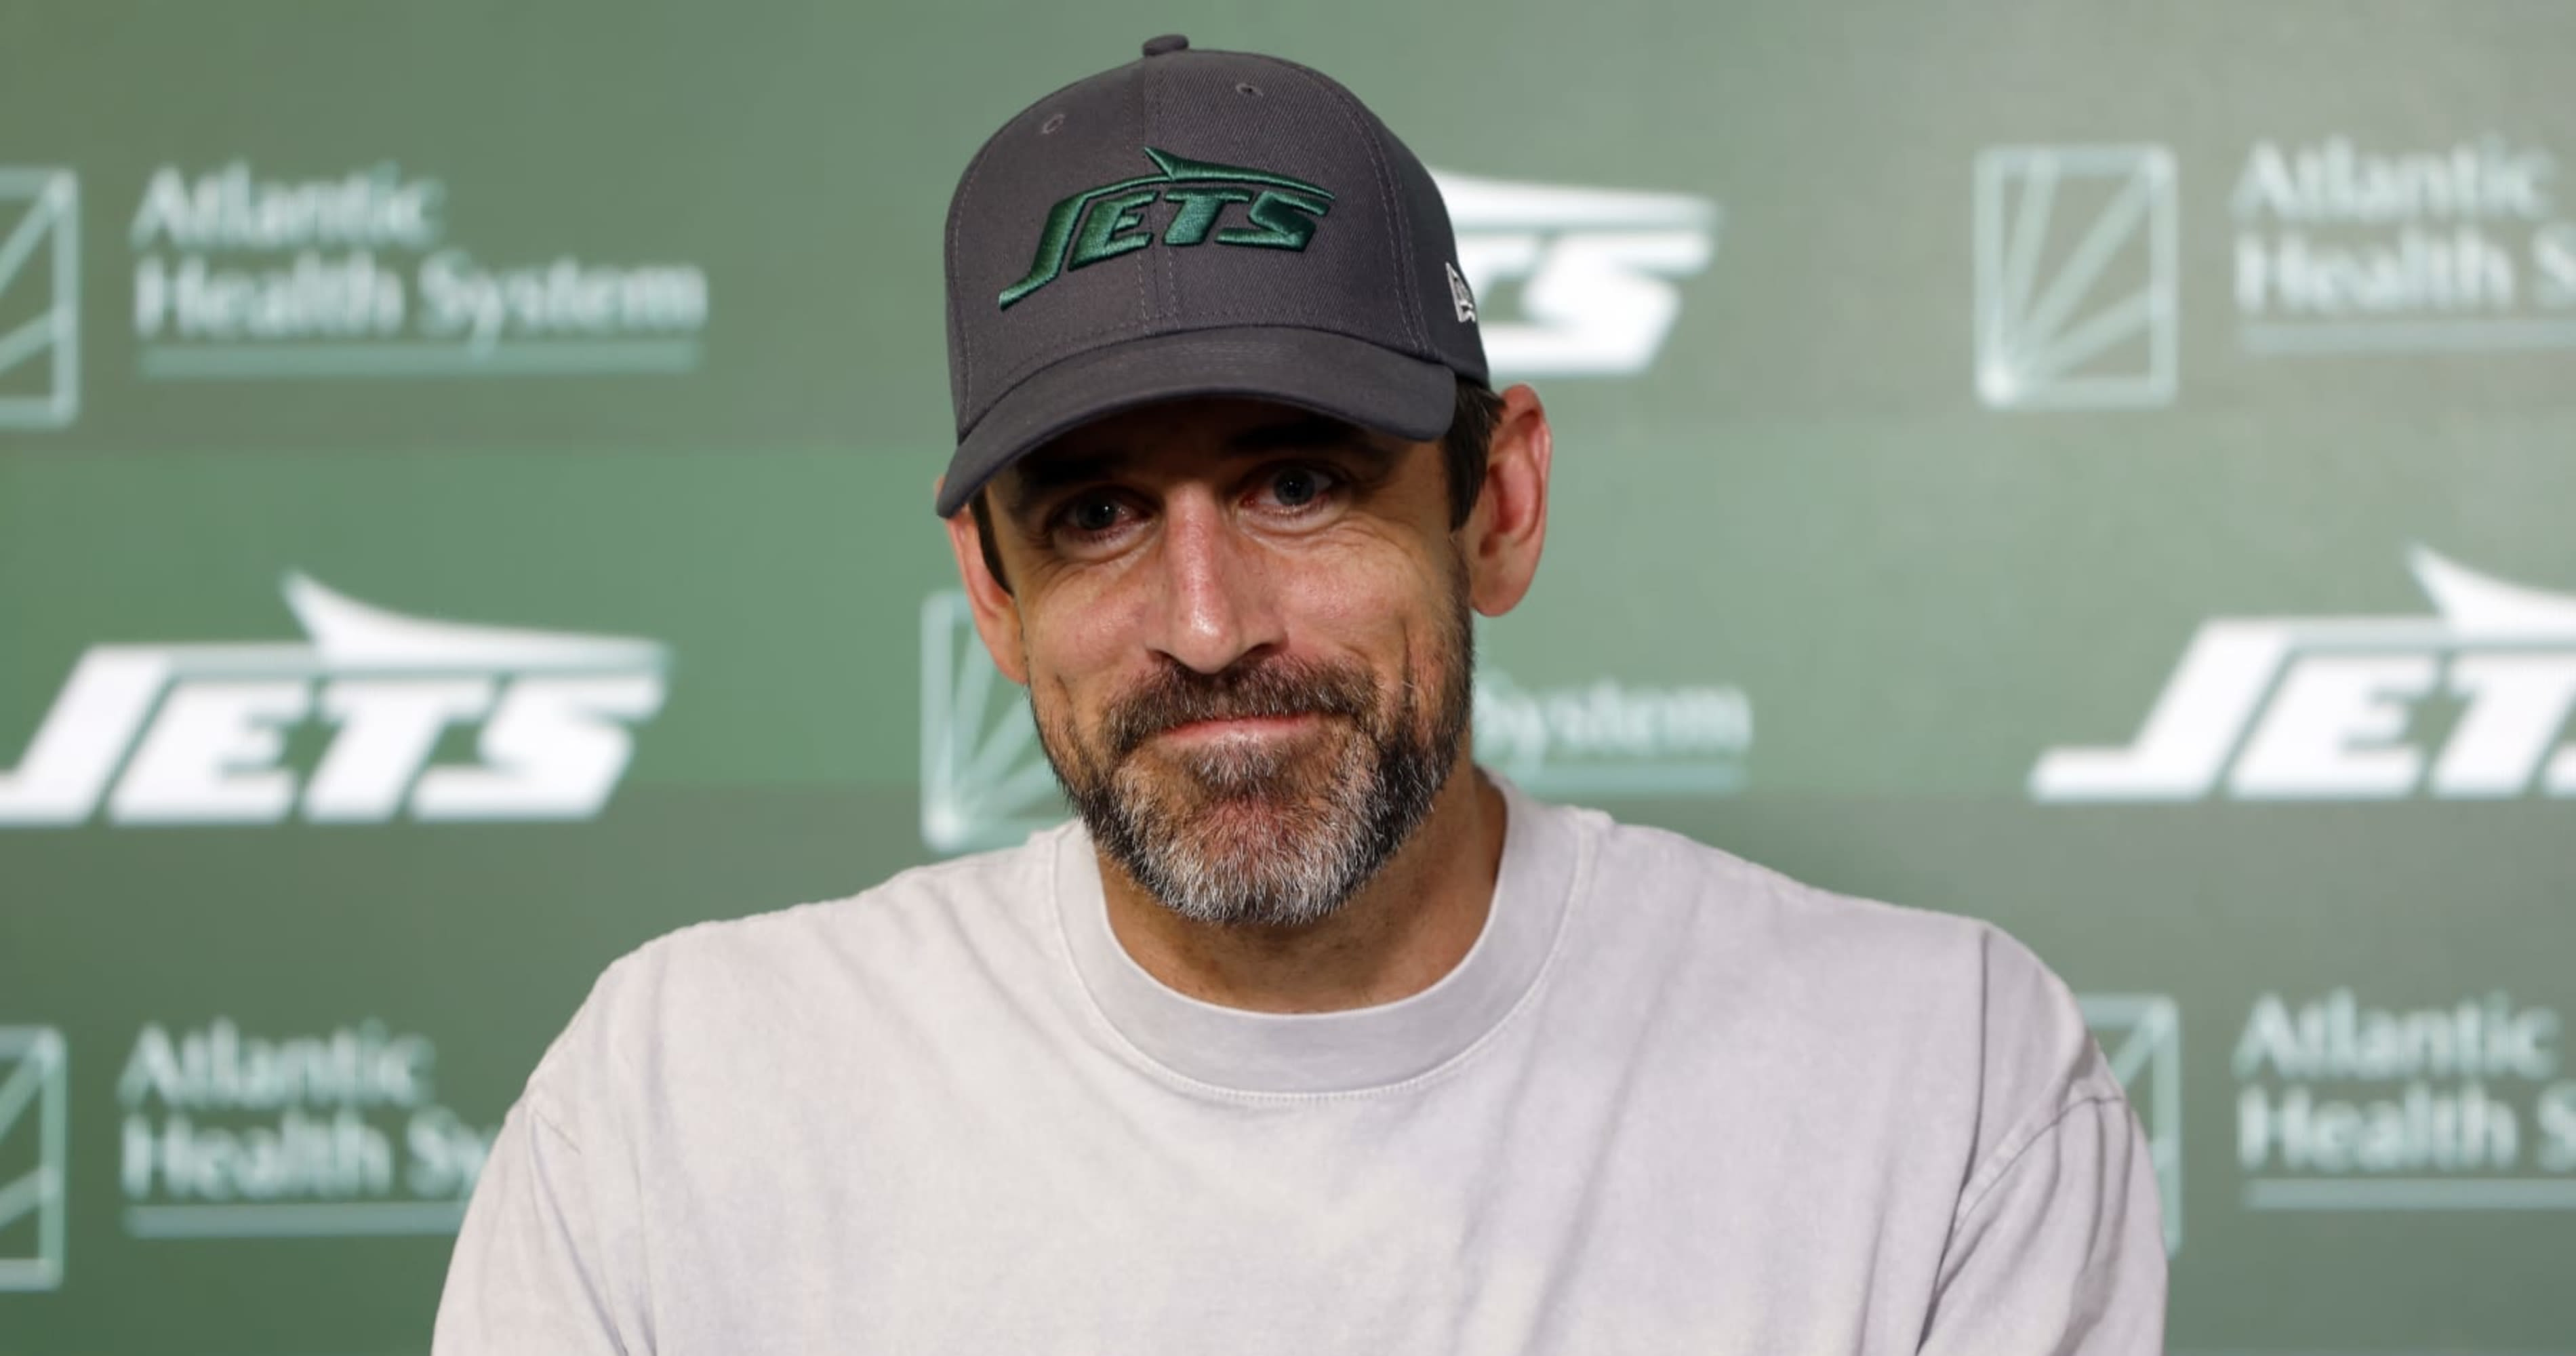 Aaron Rodgers Addresses Jets' Primetime Schedule: 'People Want to See Me Play'